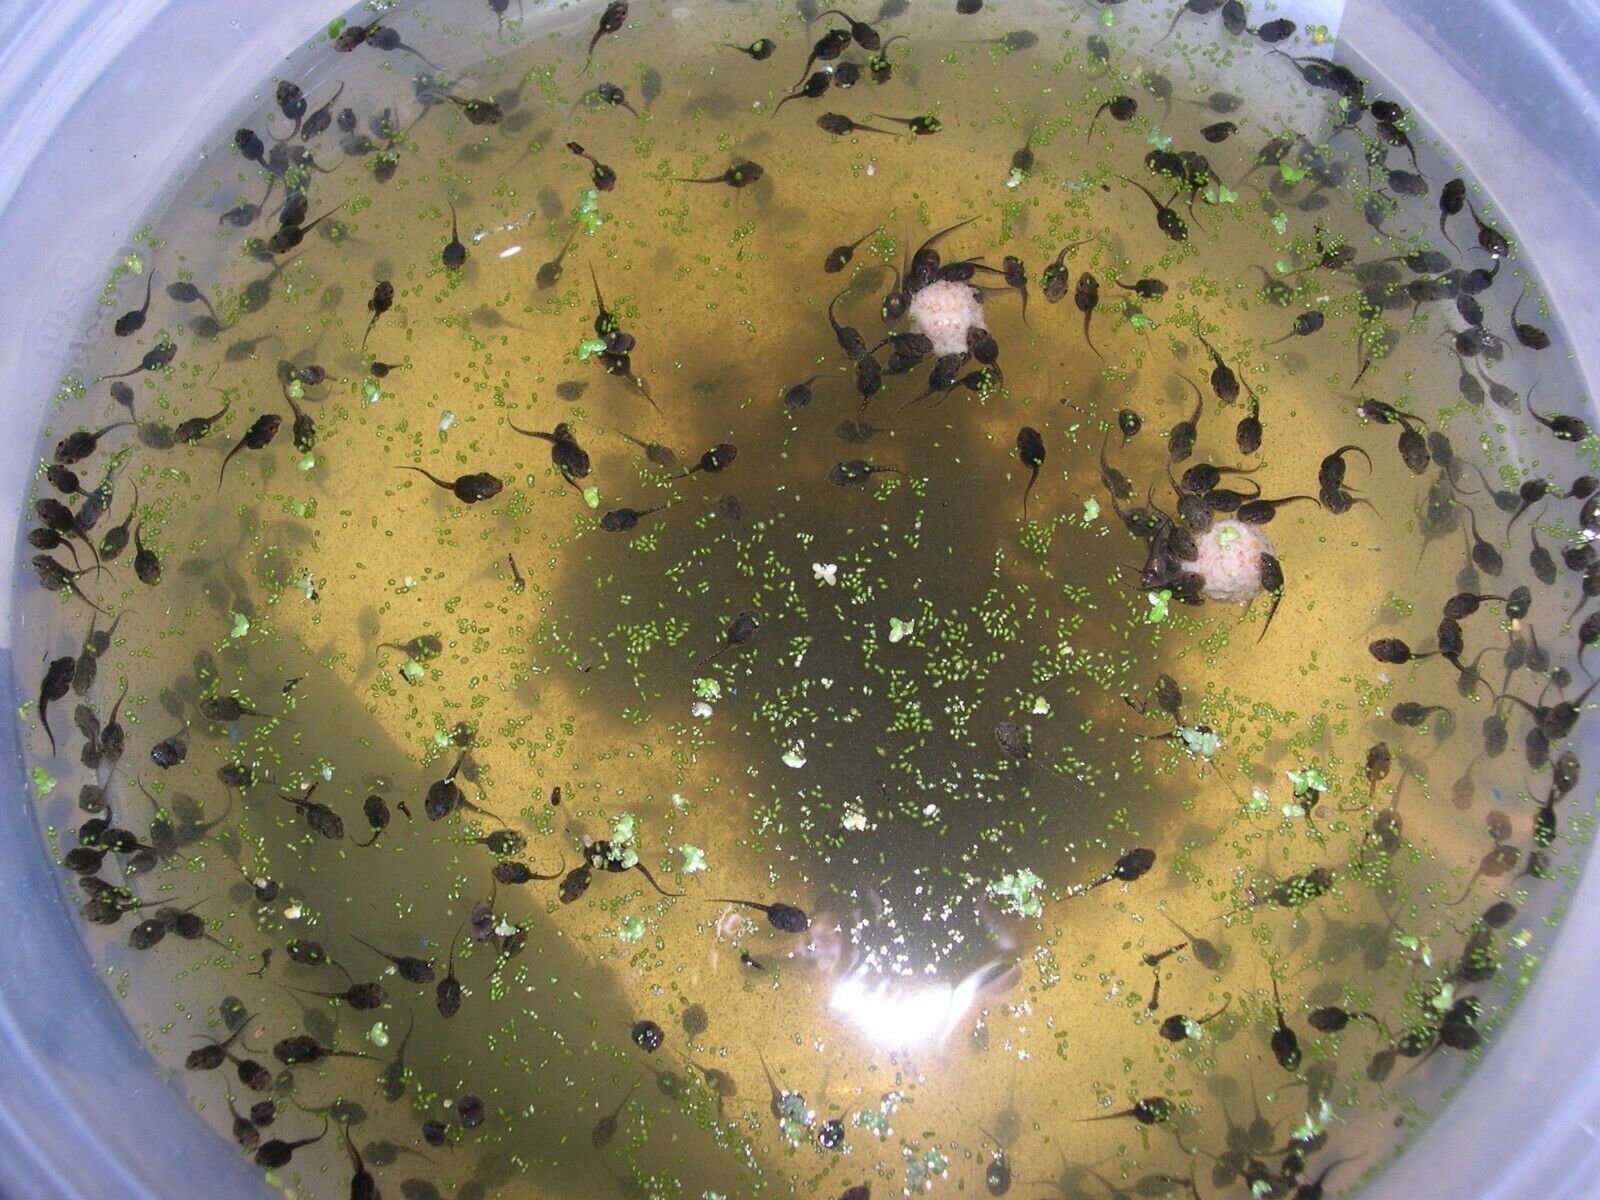 22 Live Tiny Tree frog Tadpoles free tad food and plants for the trip